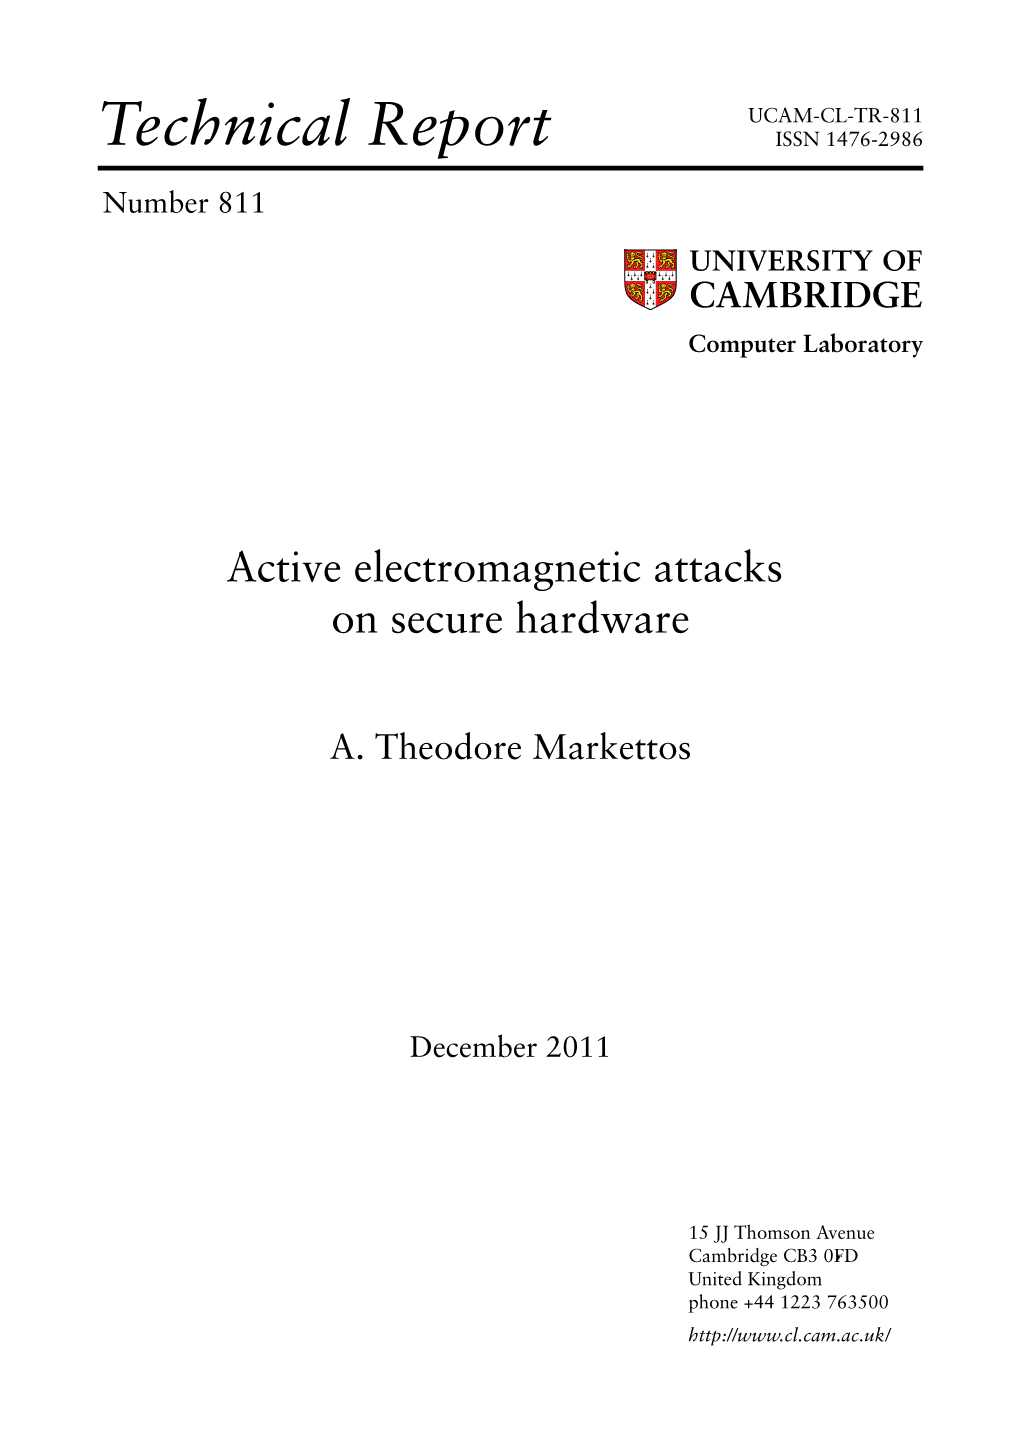 Active Electromagnetic Attacks on Secure Hardware